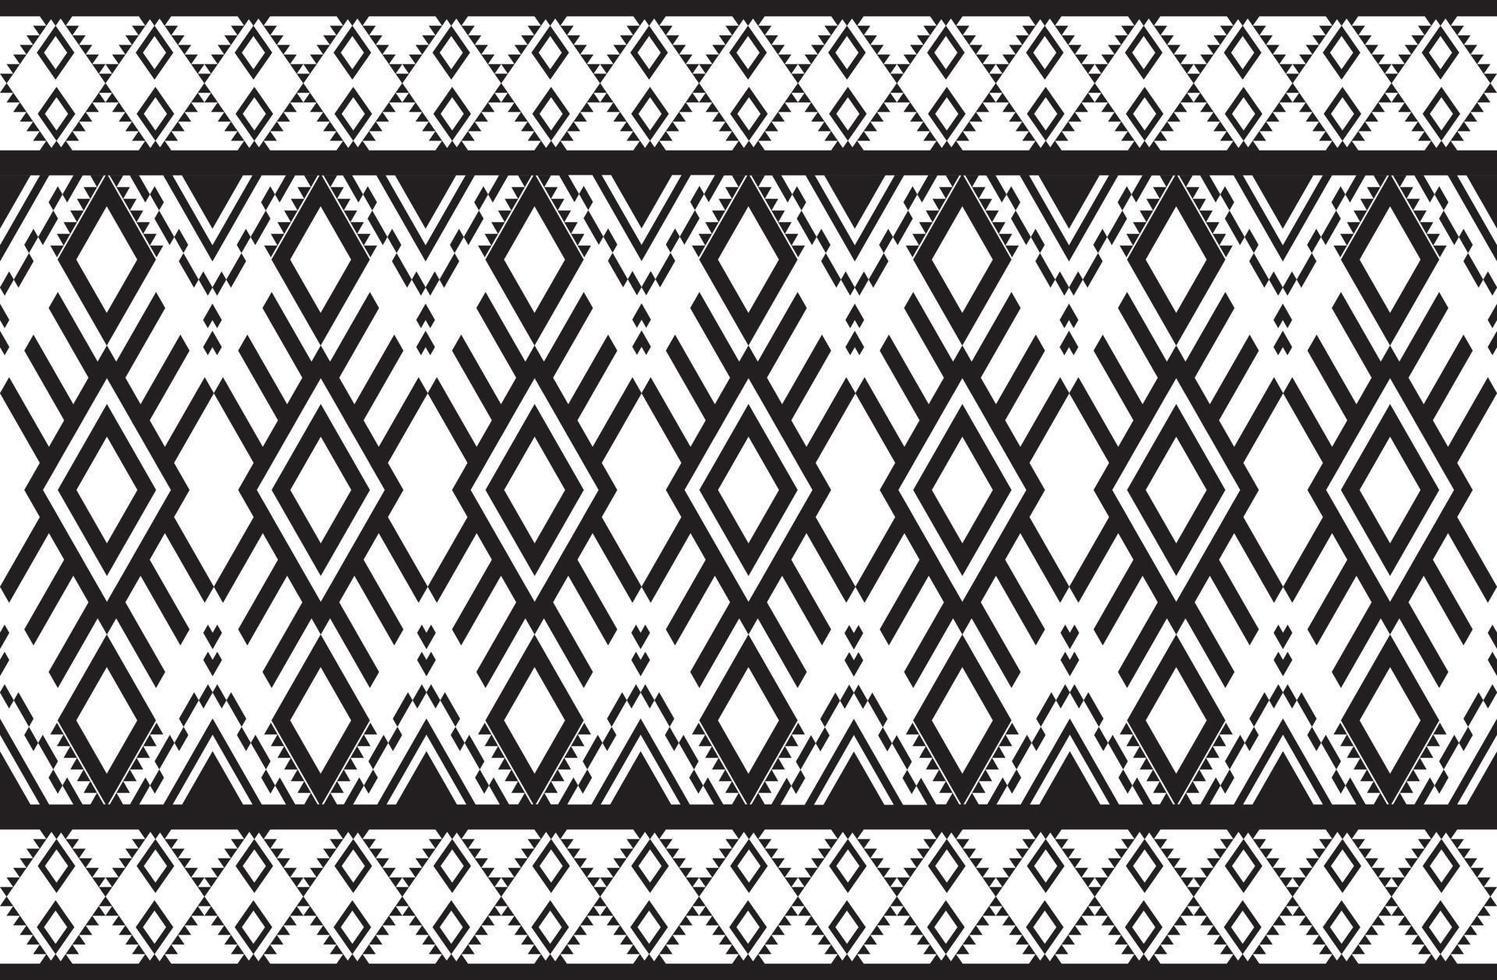 geometric design pattern fabric ethnic oriental traditional  abstract black and white. for embroidery style, curtain, background, carpet, wallpaper, cloth, wrapping, batik, fabric,Vector illustration. vector